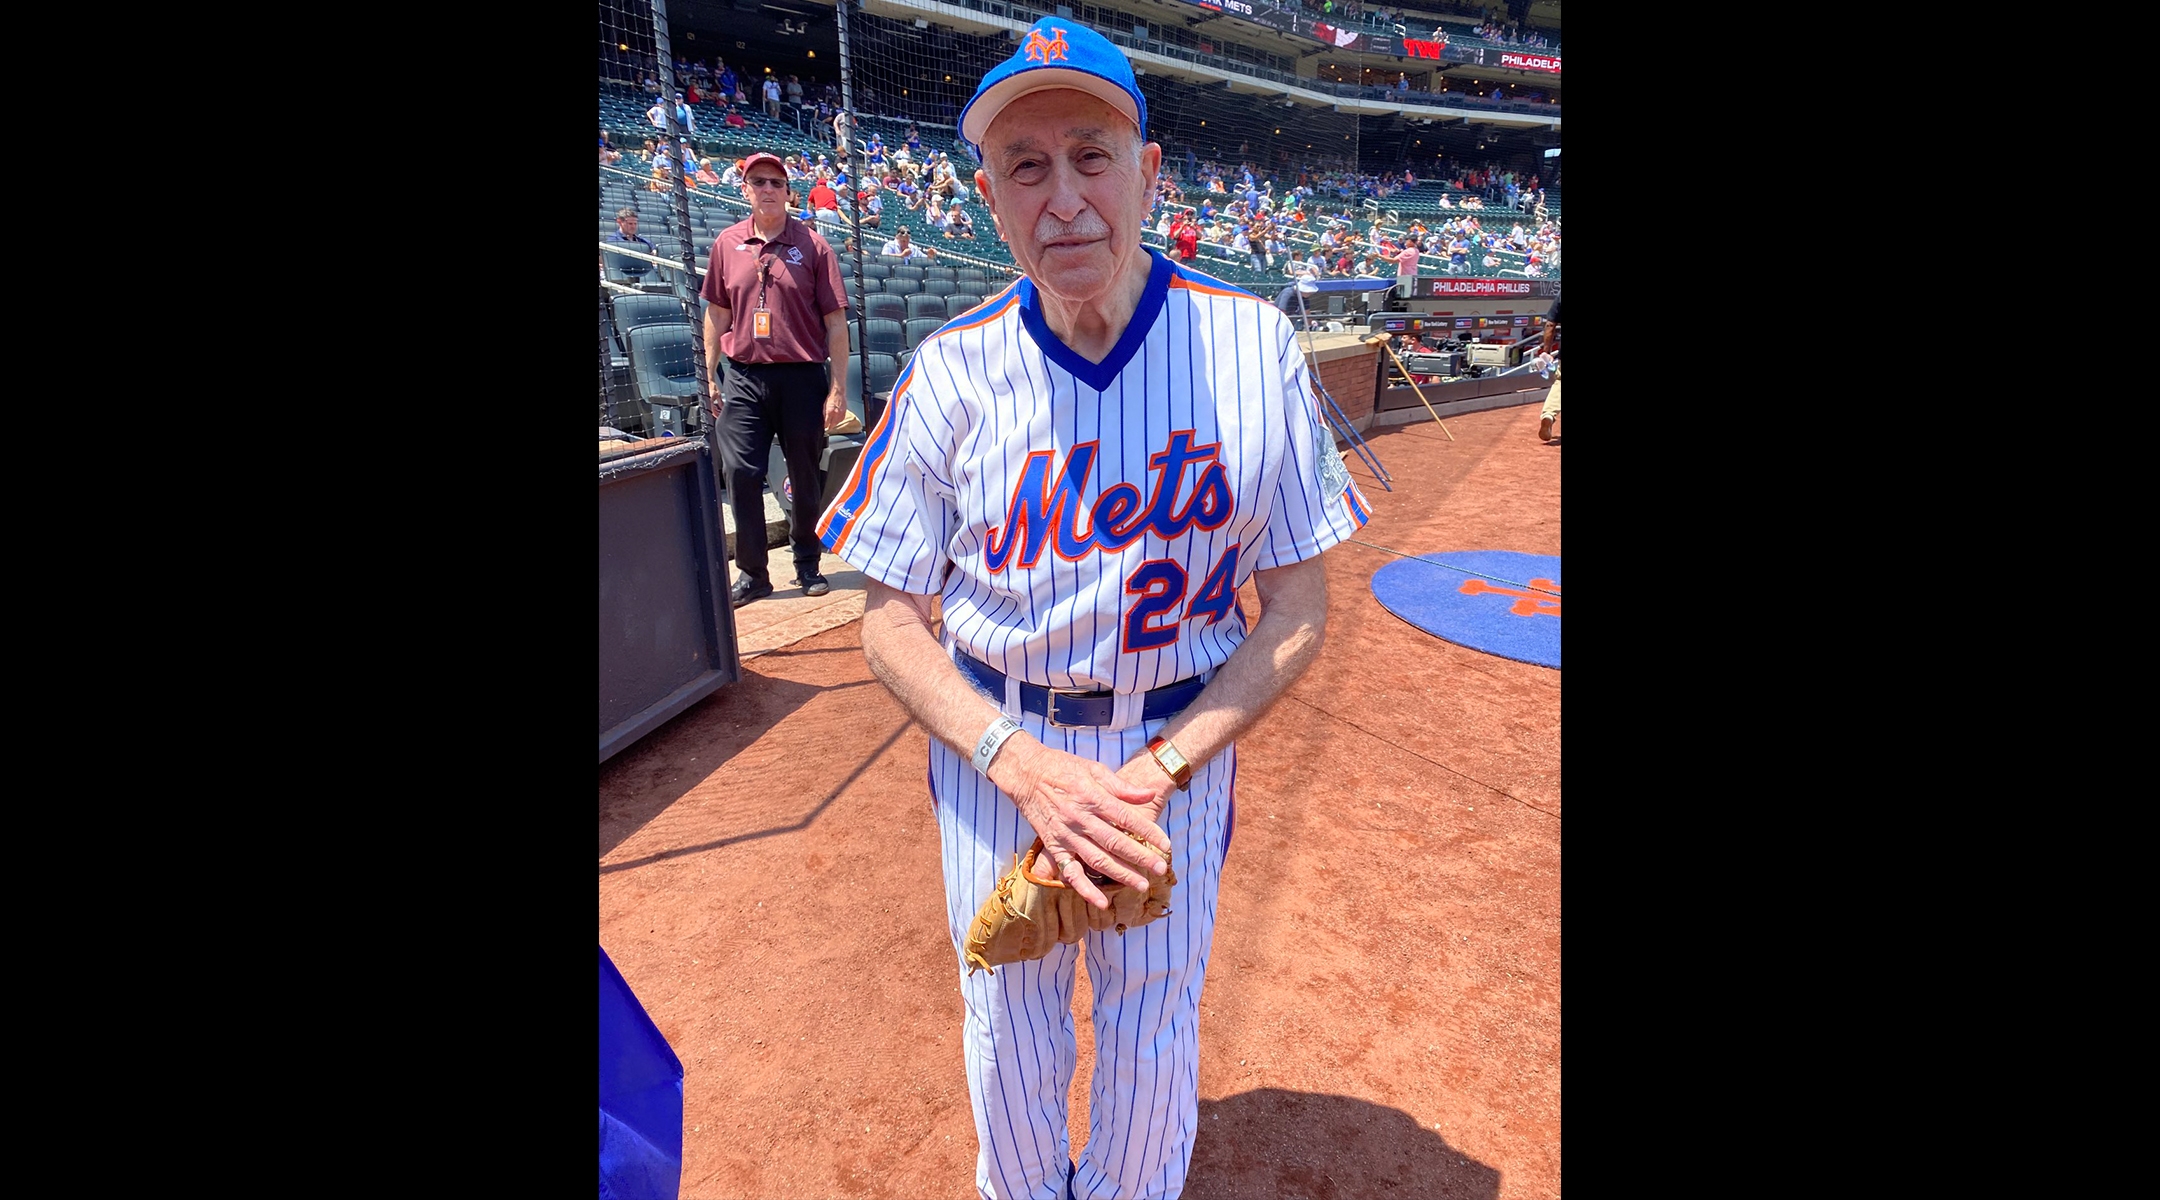 This Holocaust survivor and longtime Mets fan threw out the first pitch at Thursday’s game